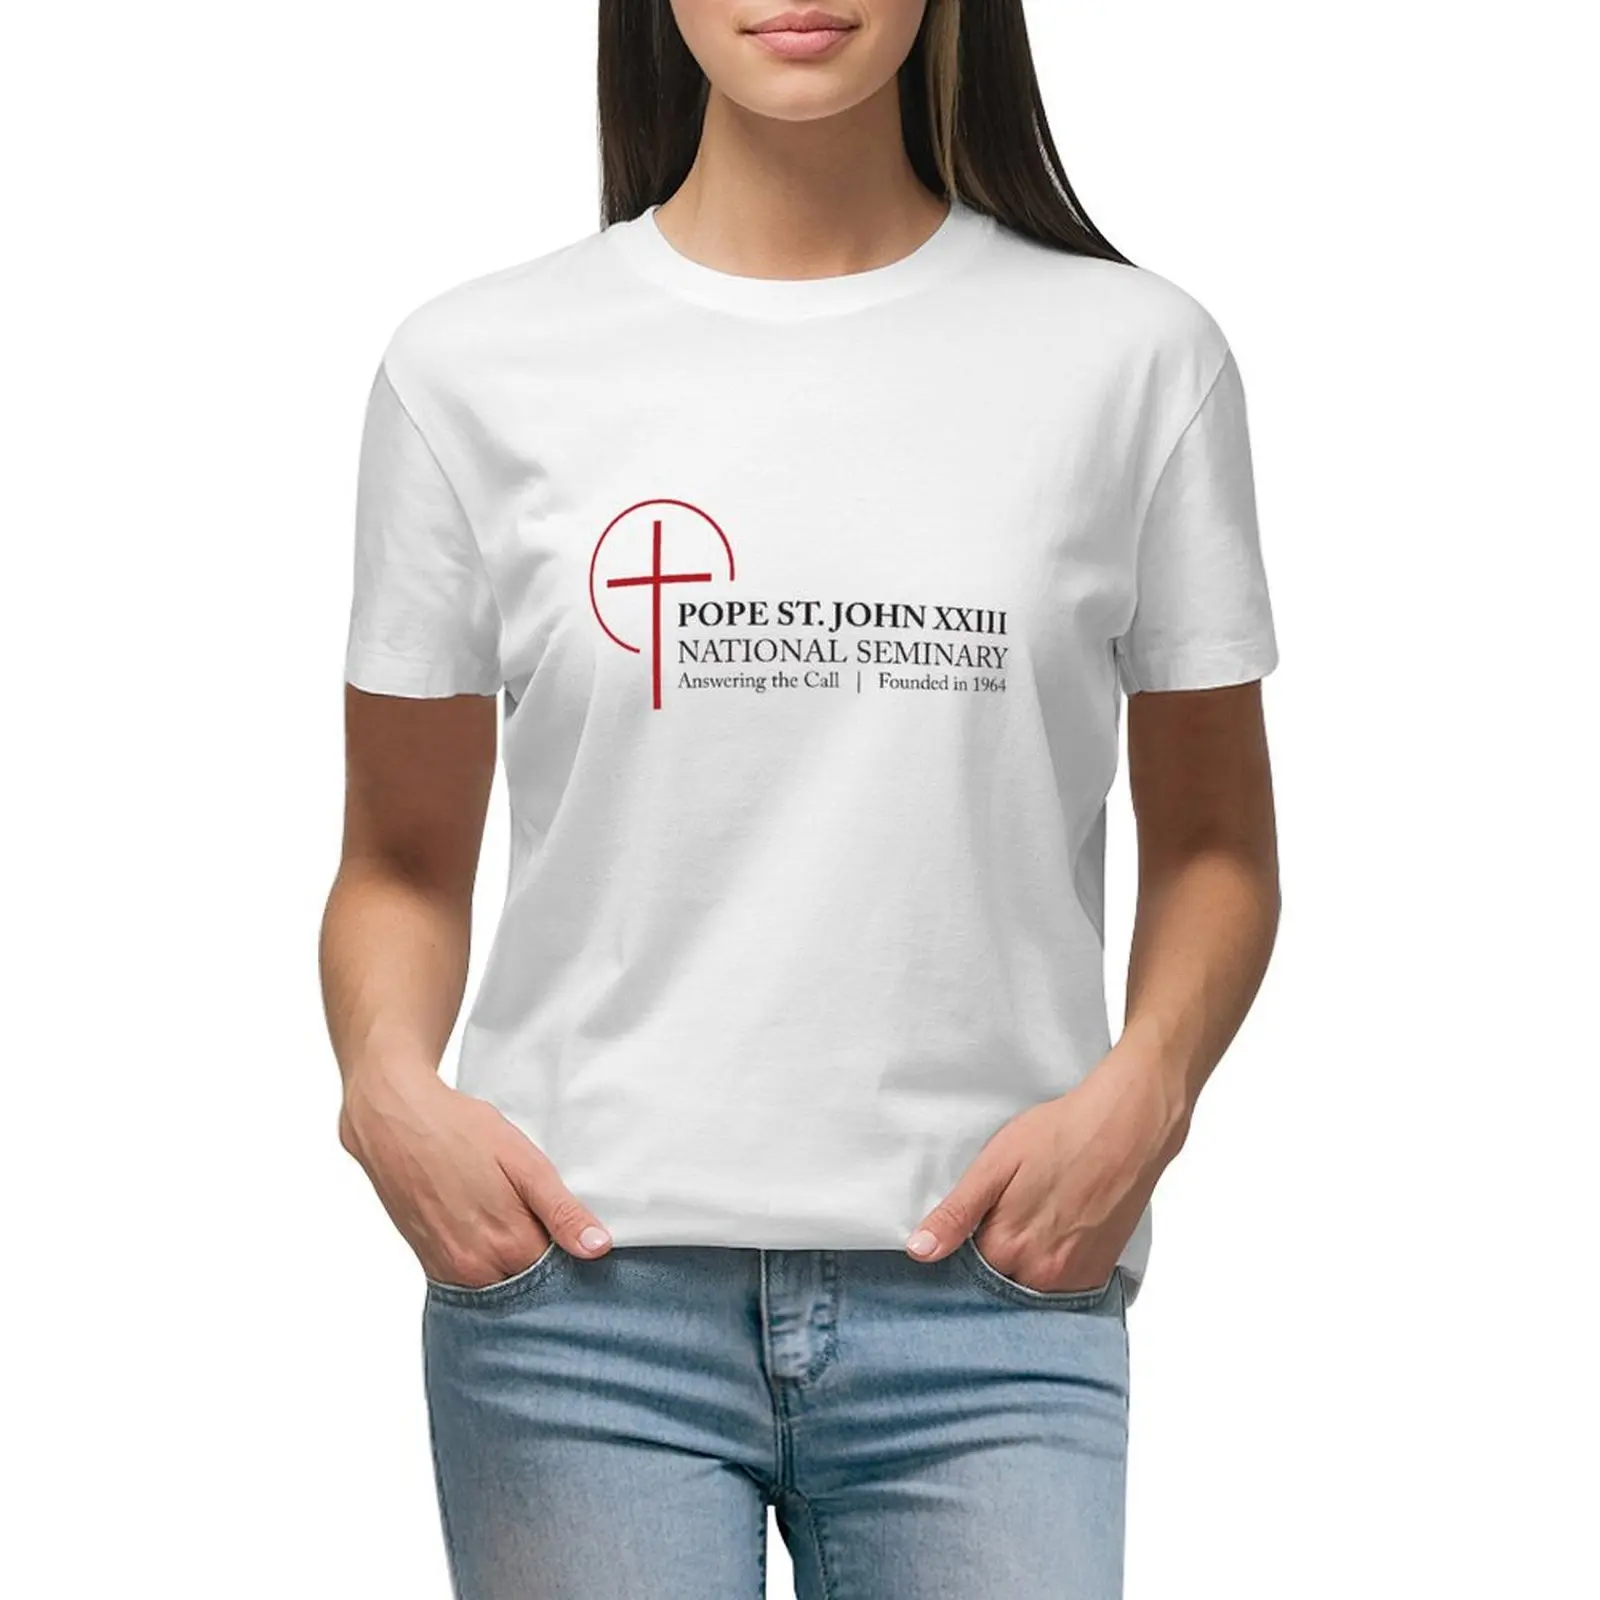 

Pope St. John XXIII National Seminary T-shirt hippie clothes Aesthetic clothing workout shirts for Women loose fit